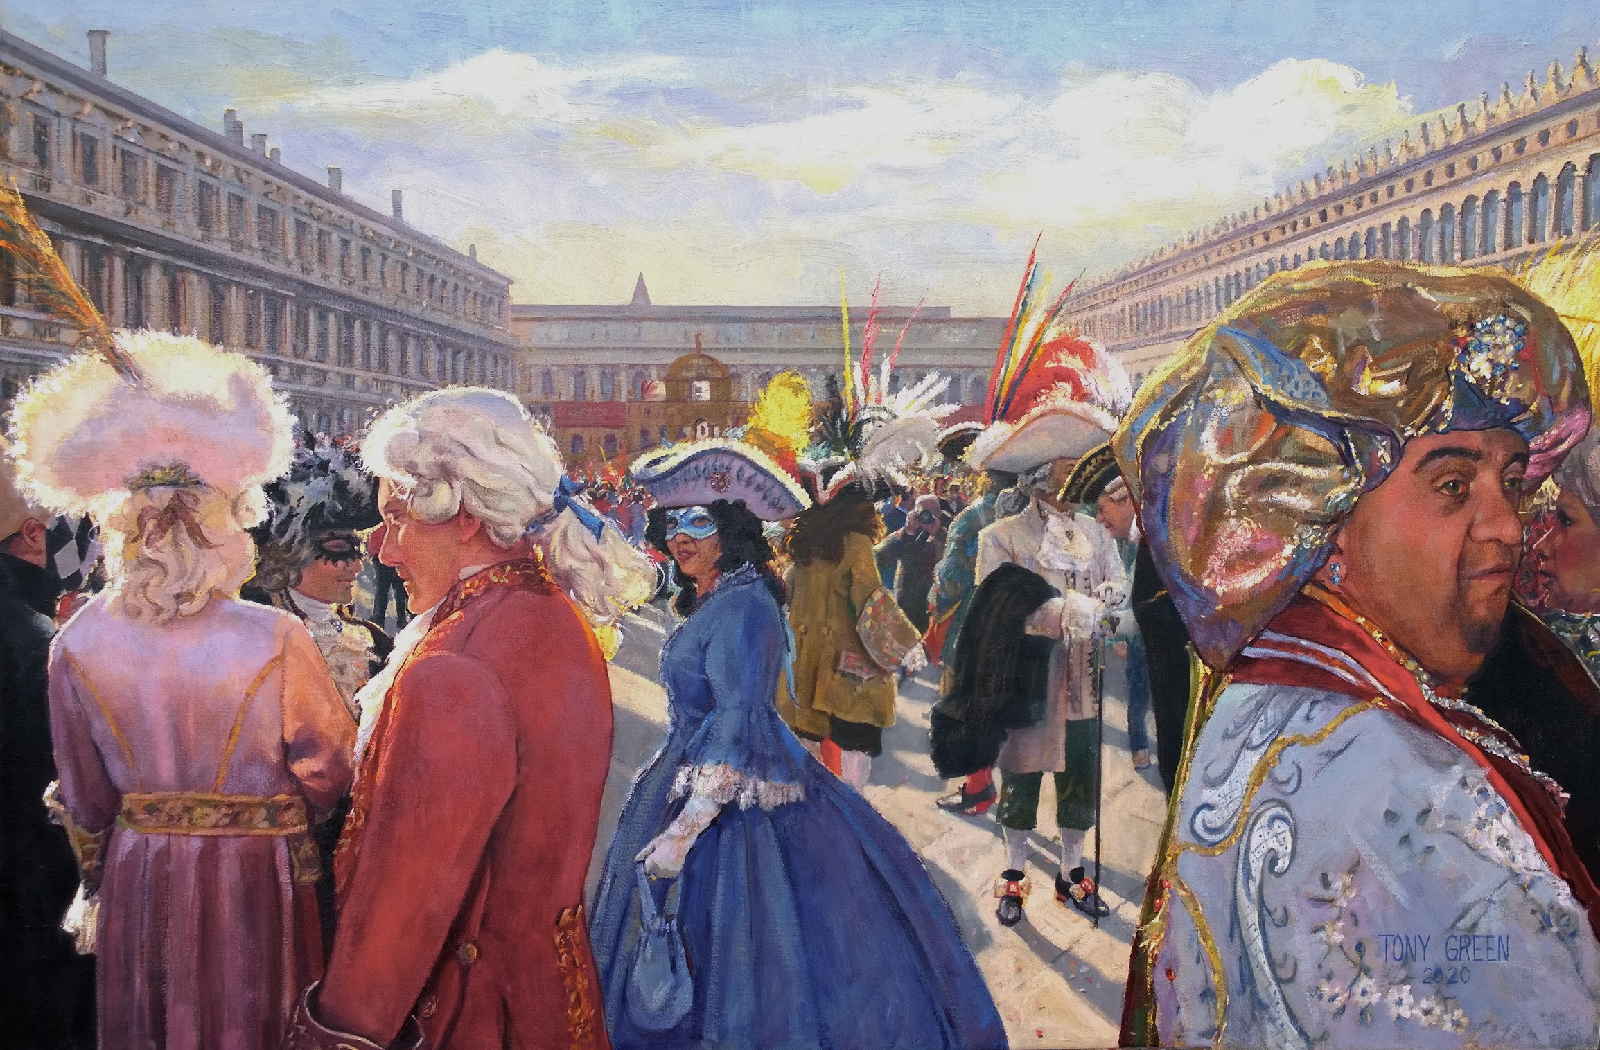 CARNIVAL IN PIAZZA S. MARCO